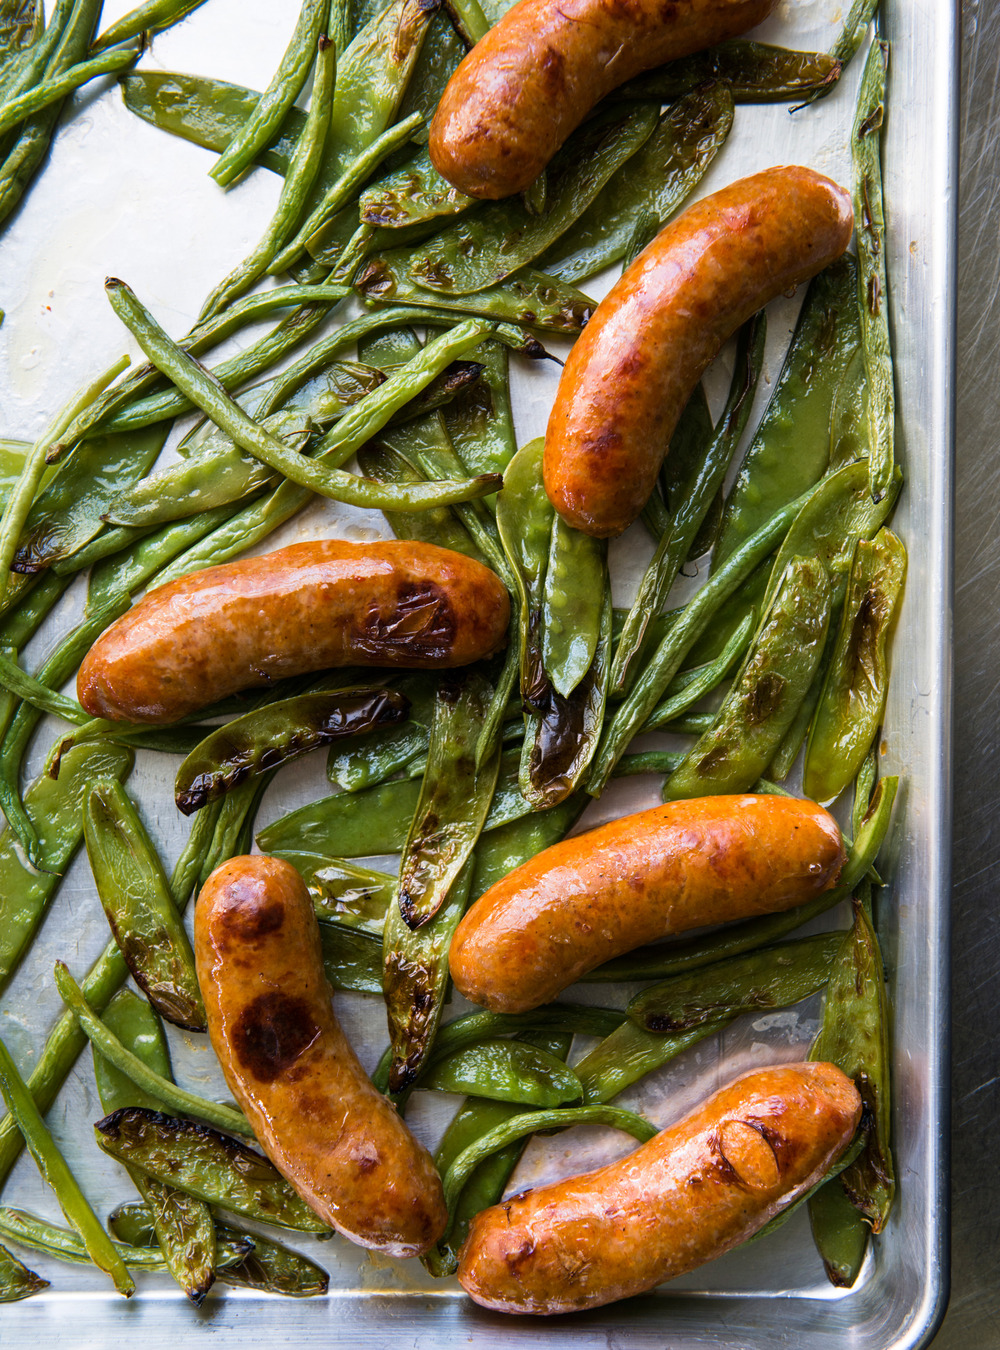 Baked Sausage with Green Beans